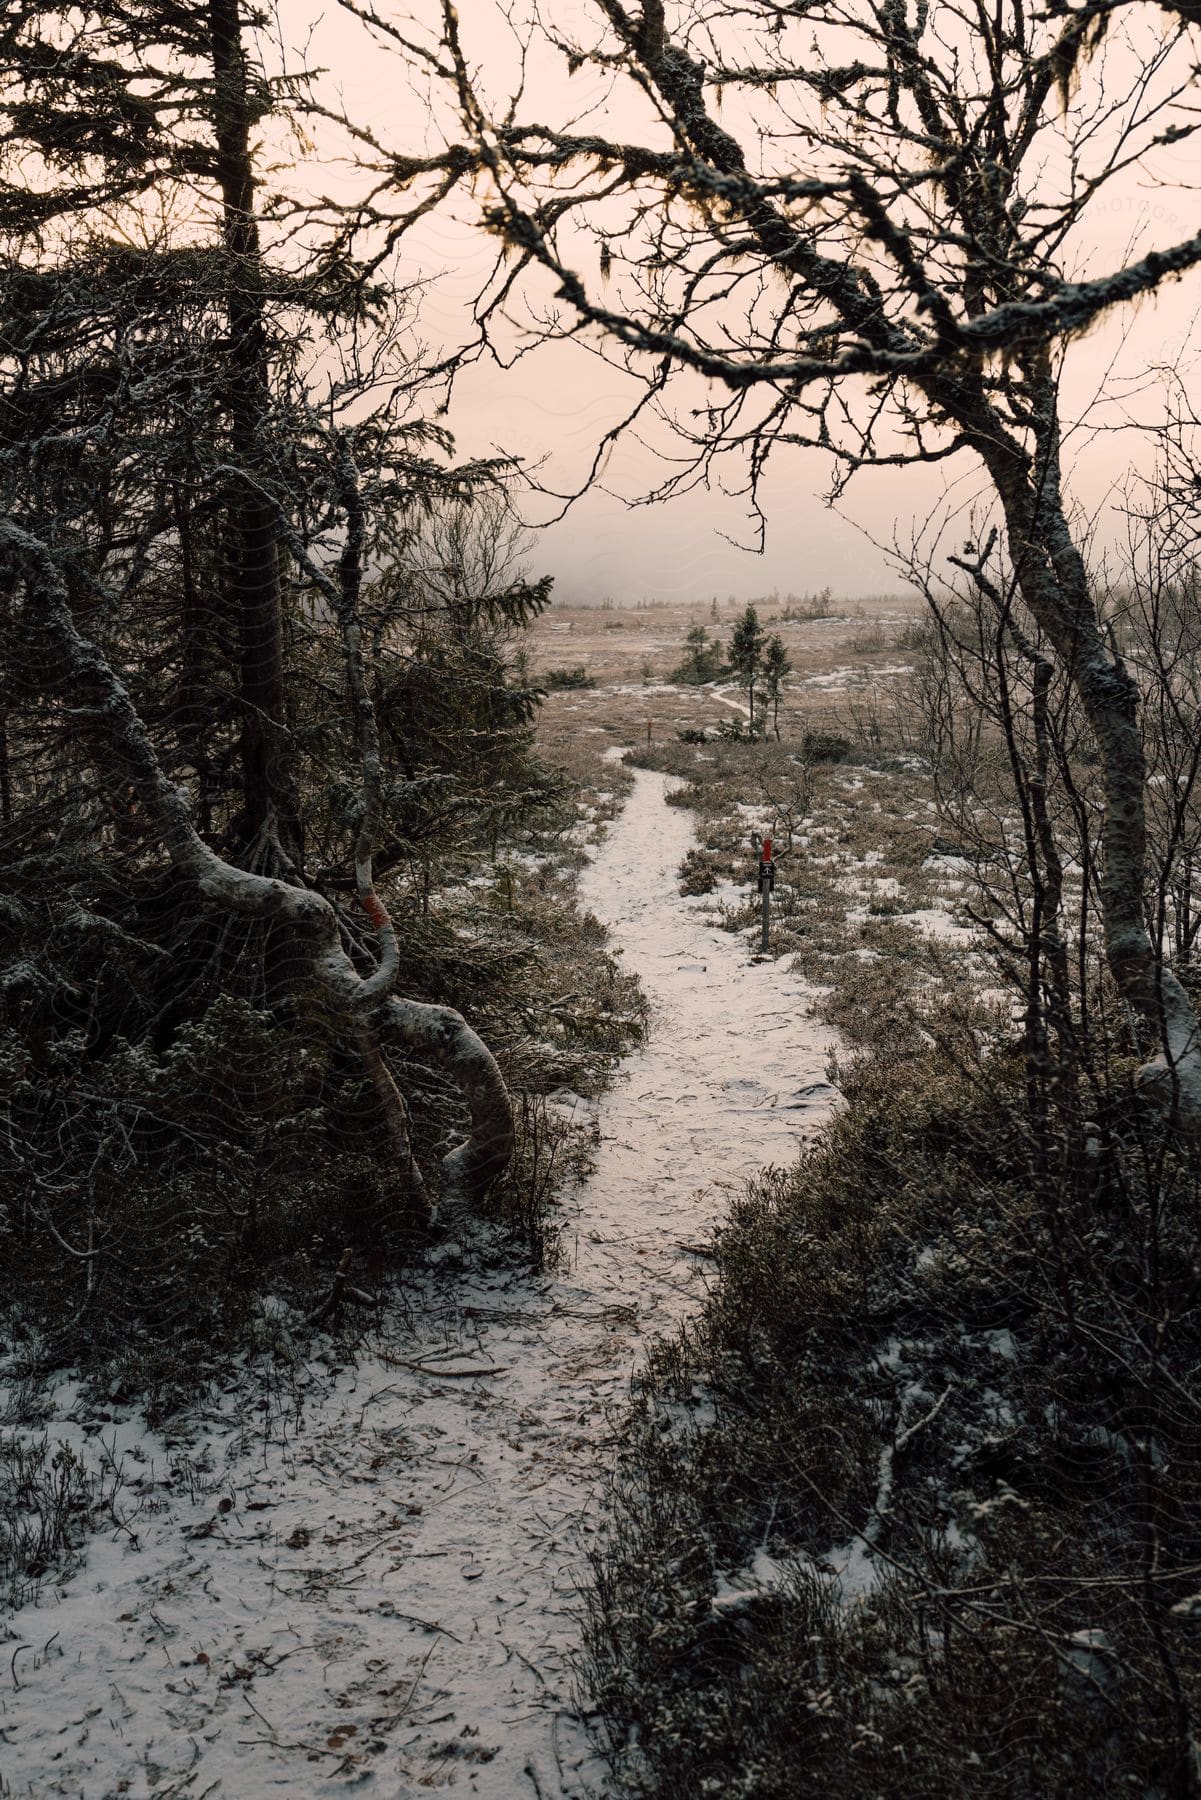 A snow covered trail runs through the woods and across a field